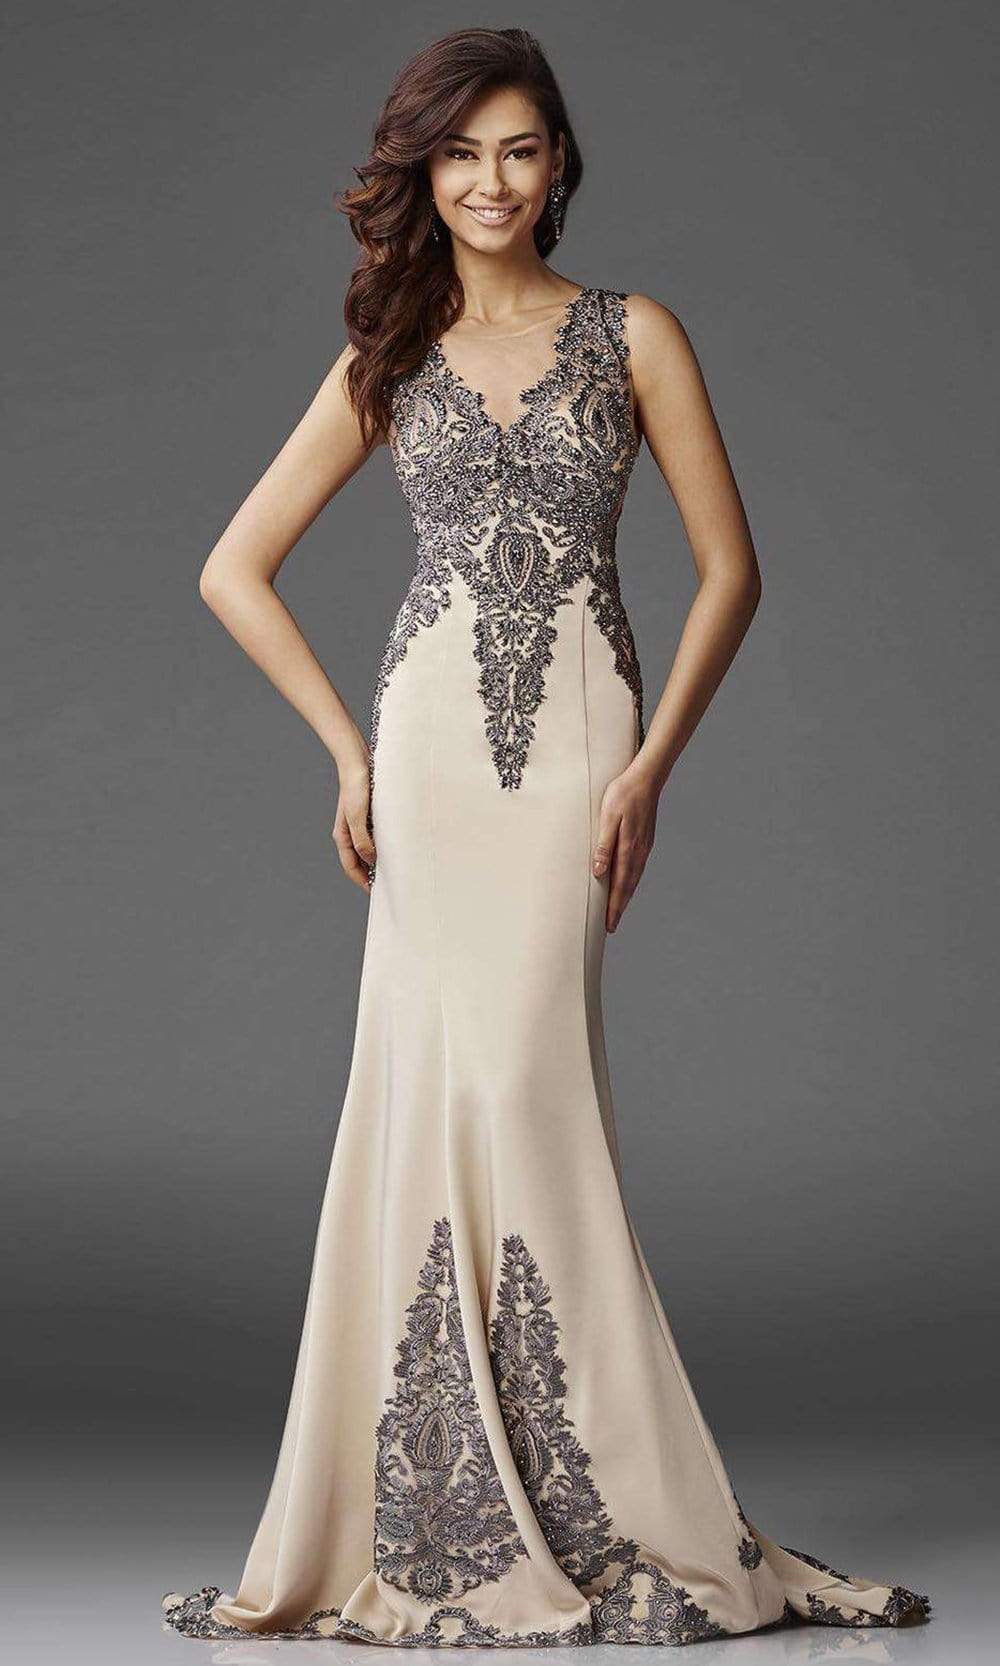 Image of Clarisse - M6419 Intricate Embellished Lace Sheath Gown